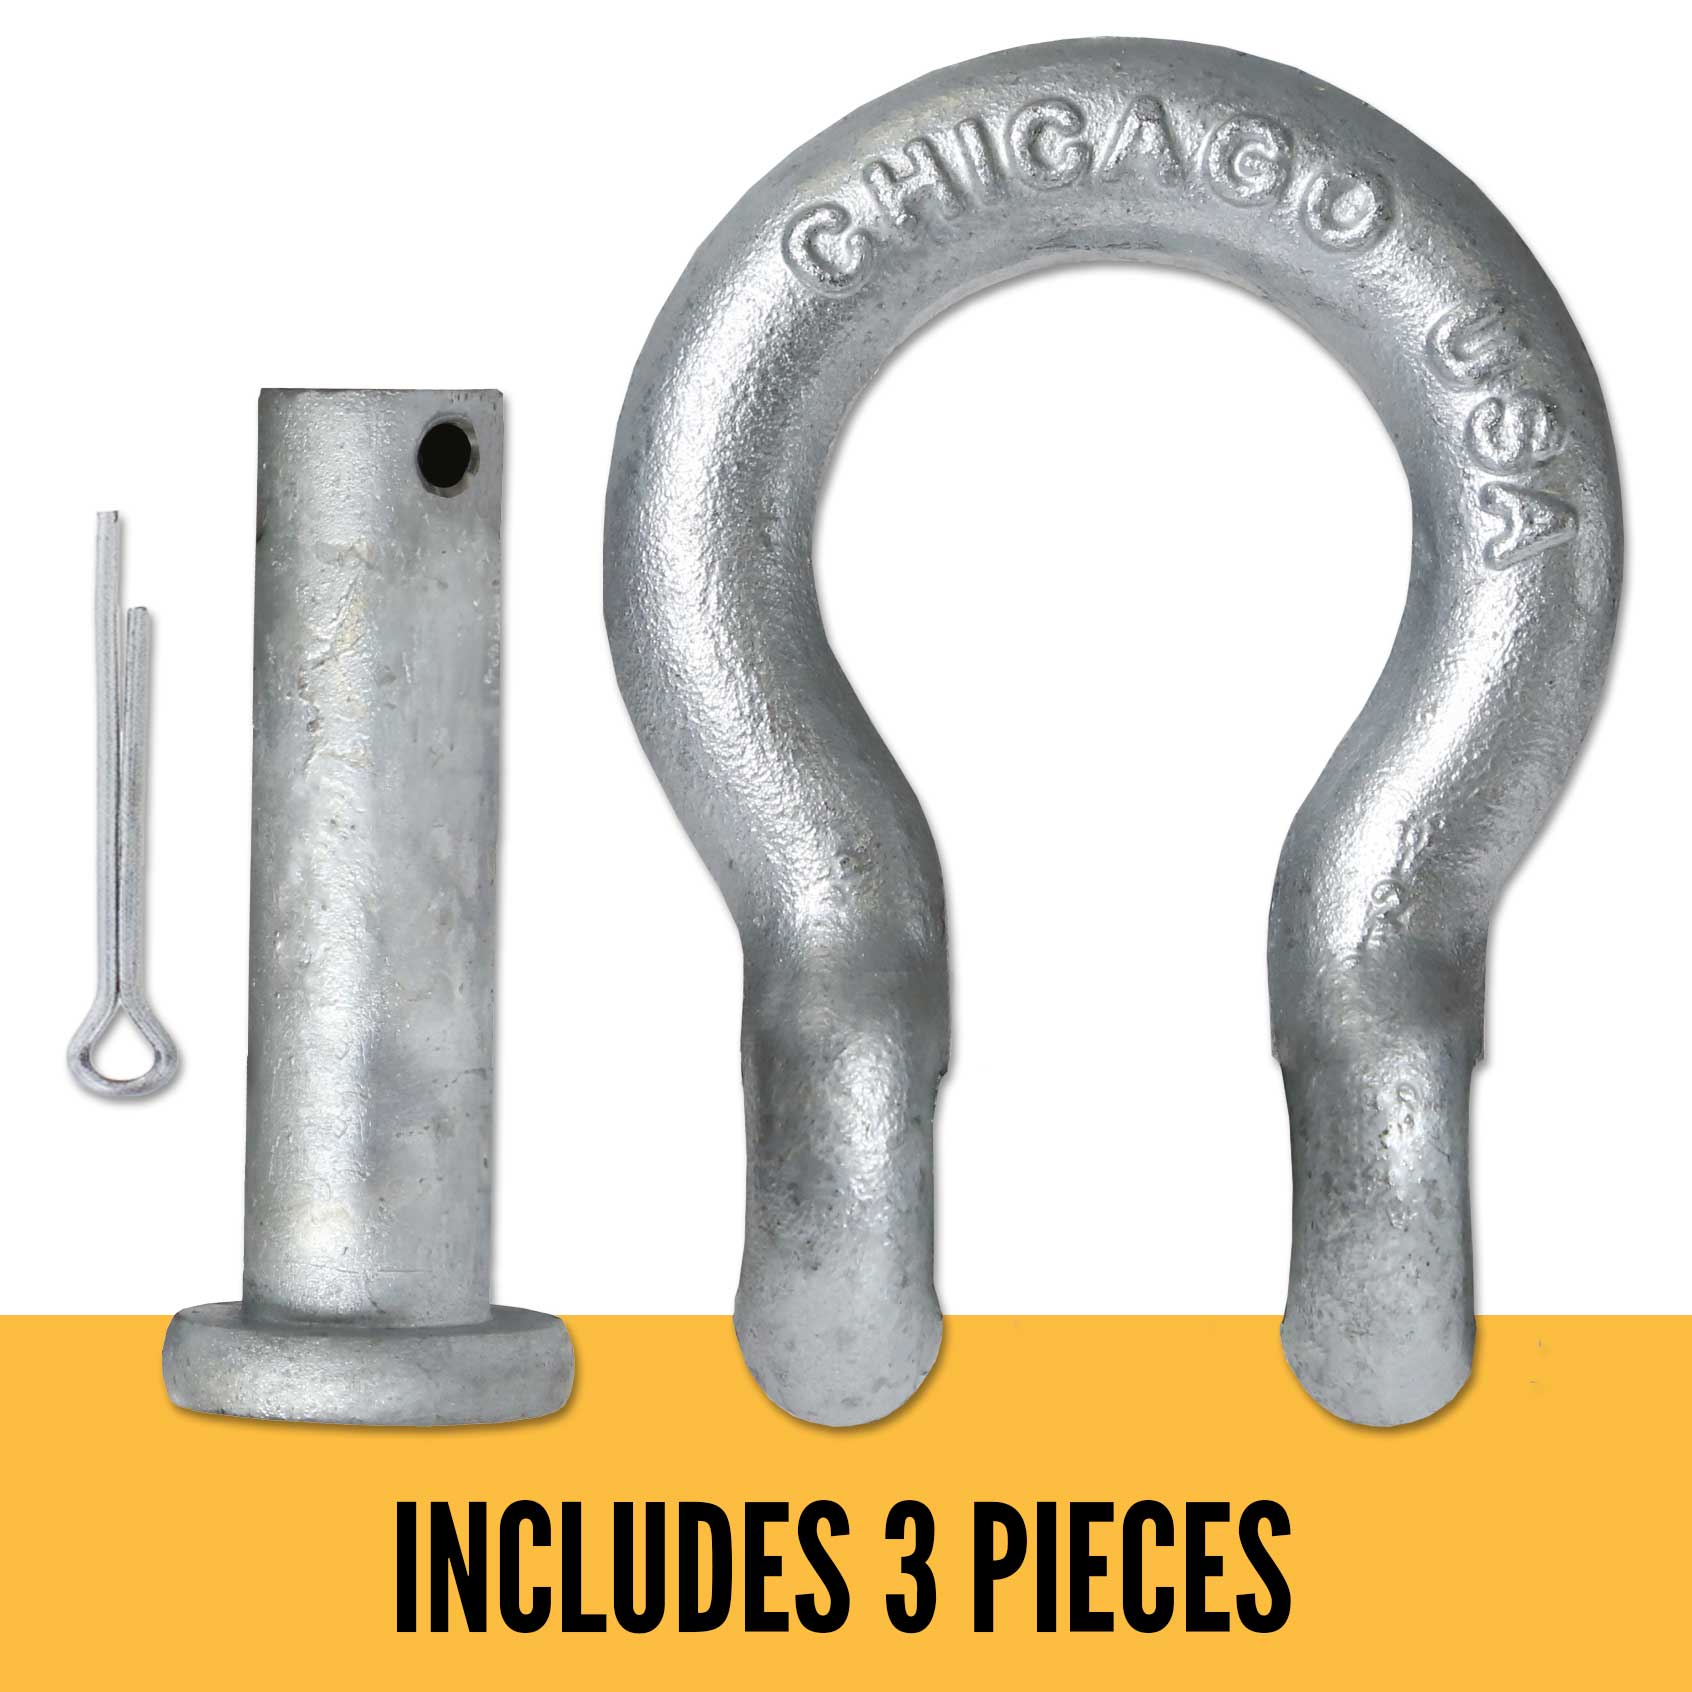 Anchor Shackle - Chicago Hardware - Round Pin - 1" Galvanized Steel - 8.5 Ton parts of a shackle